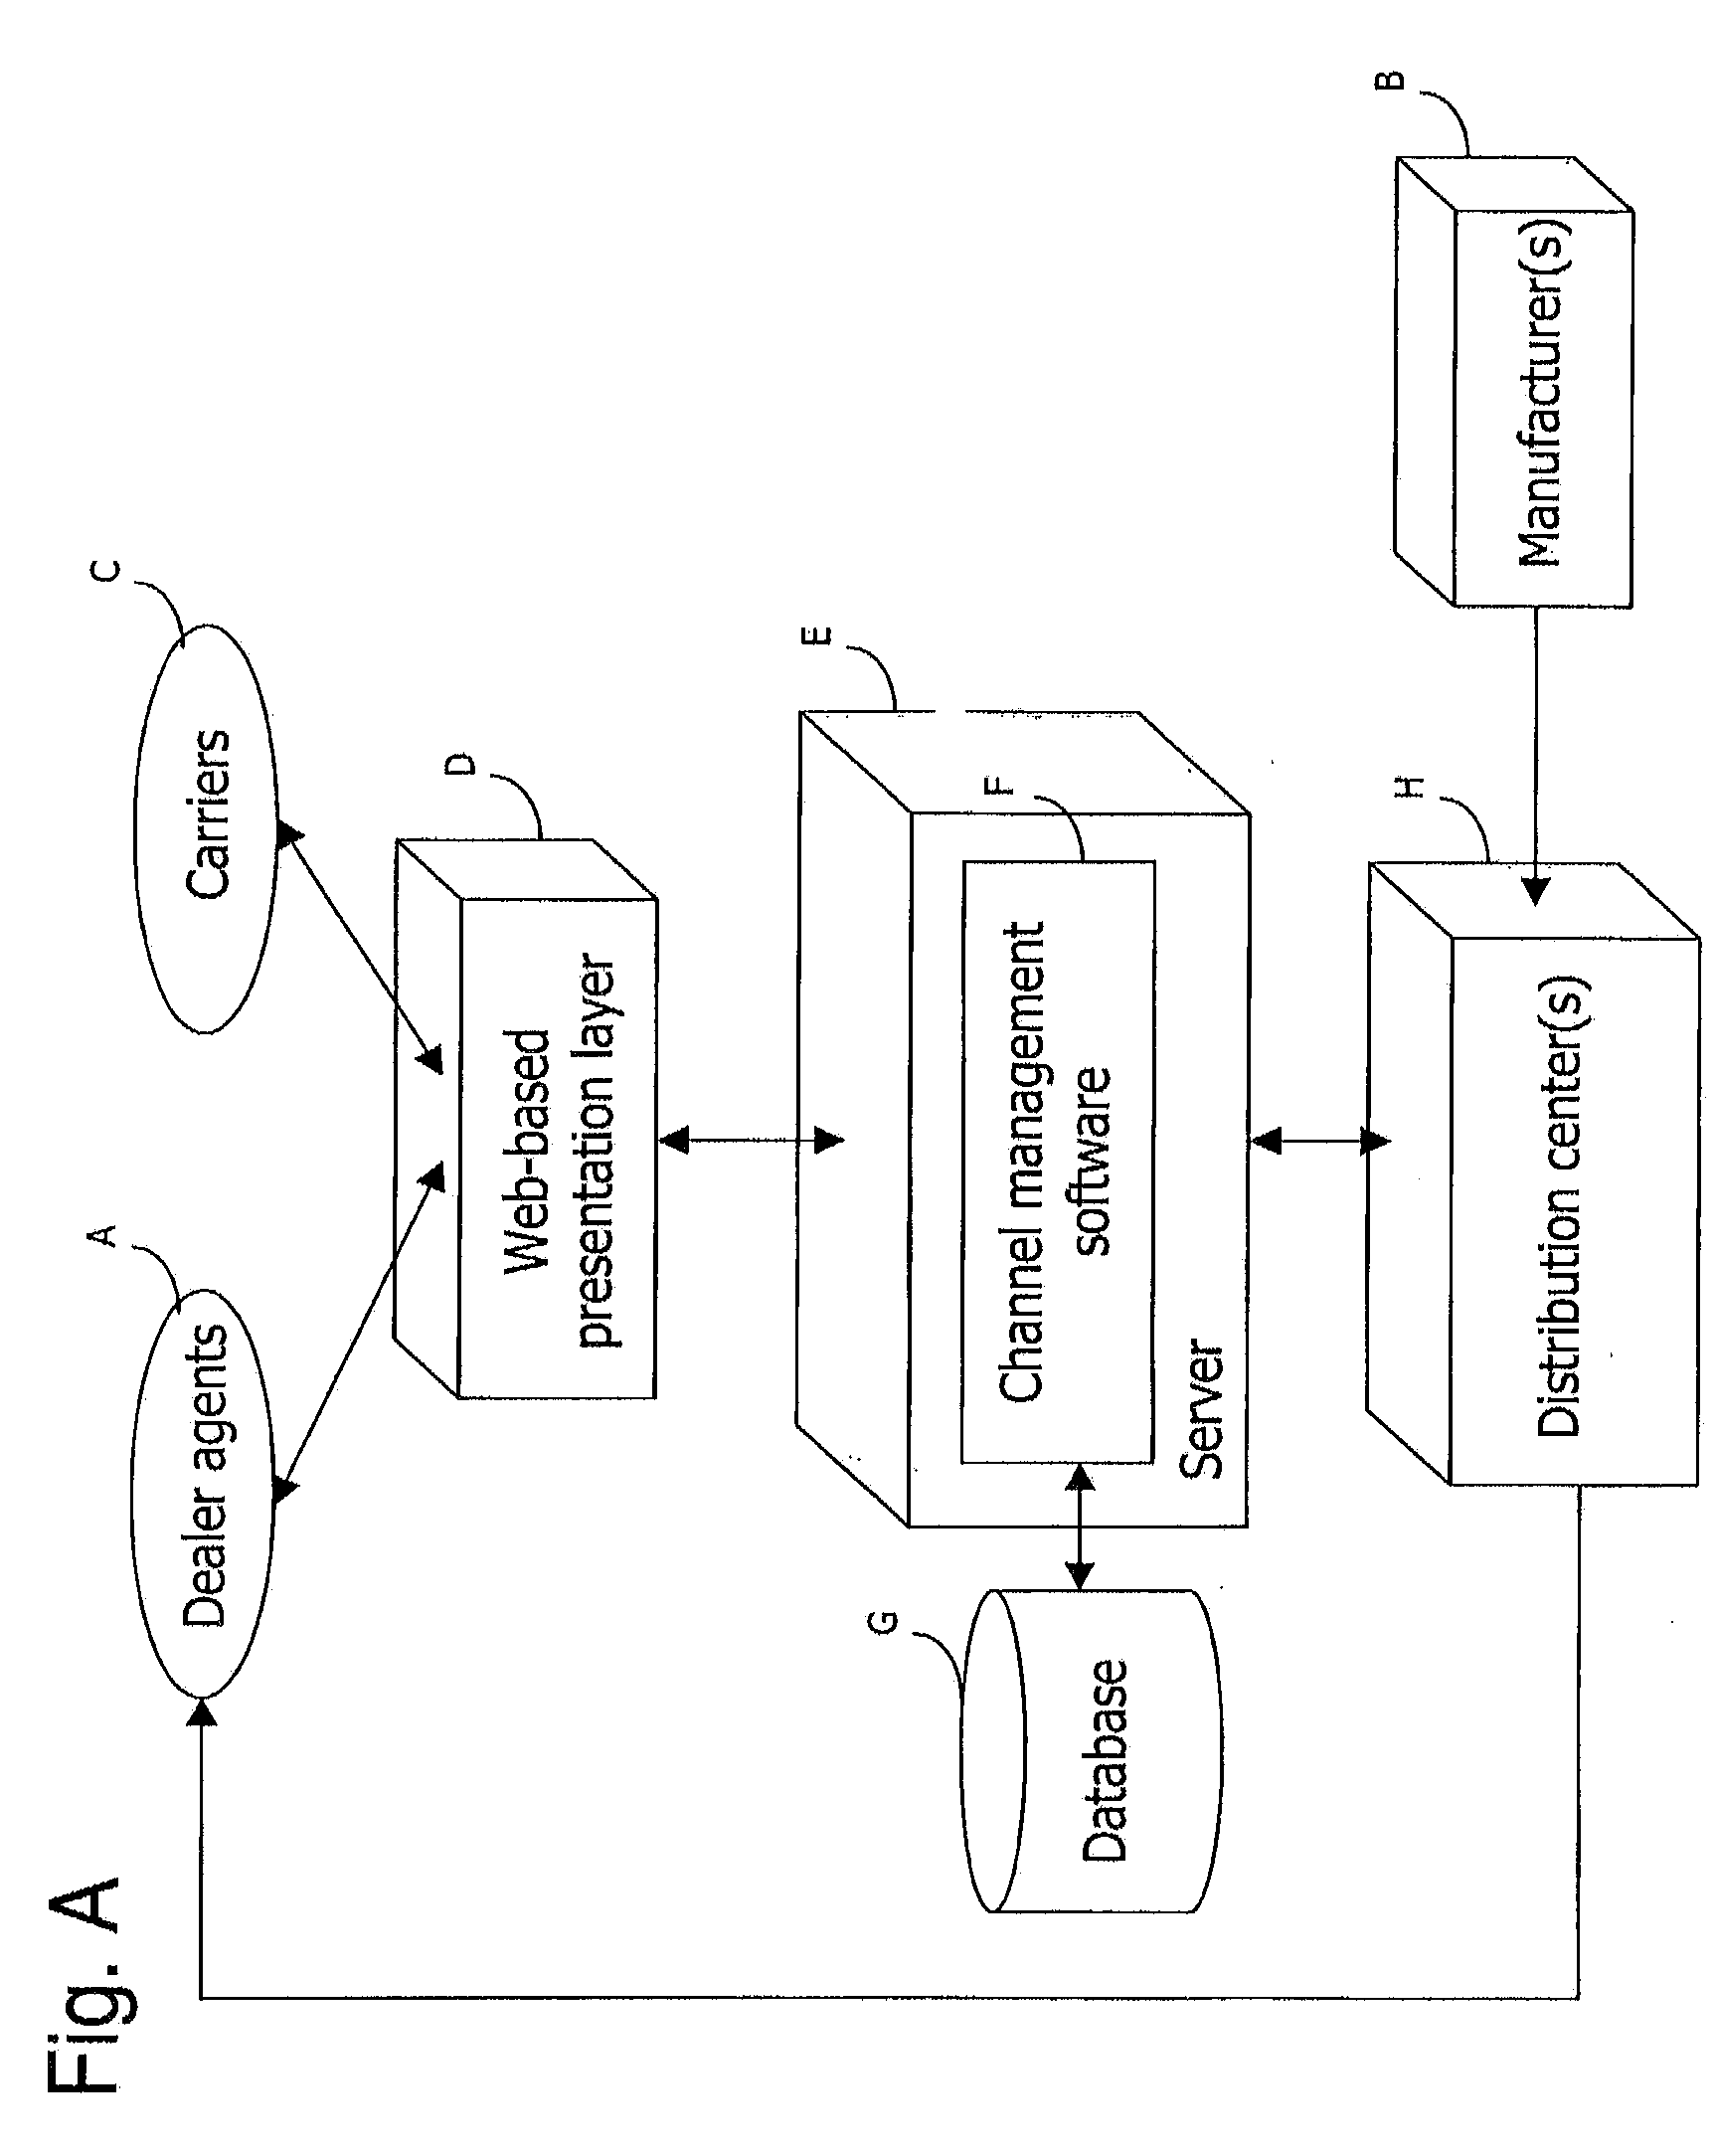 Distribution channel management for wireless devices and services